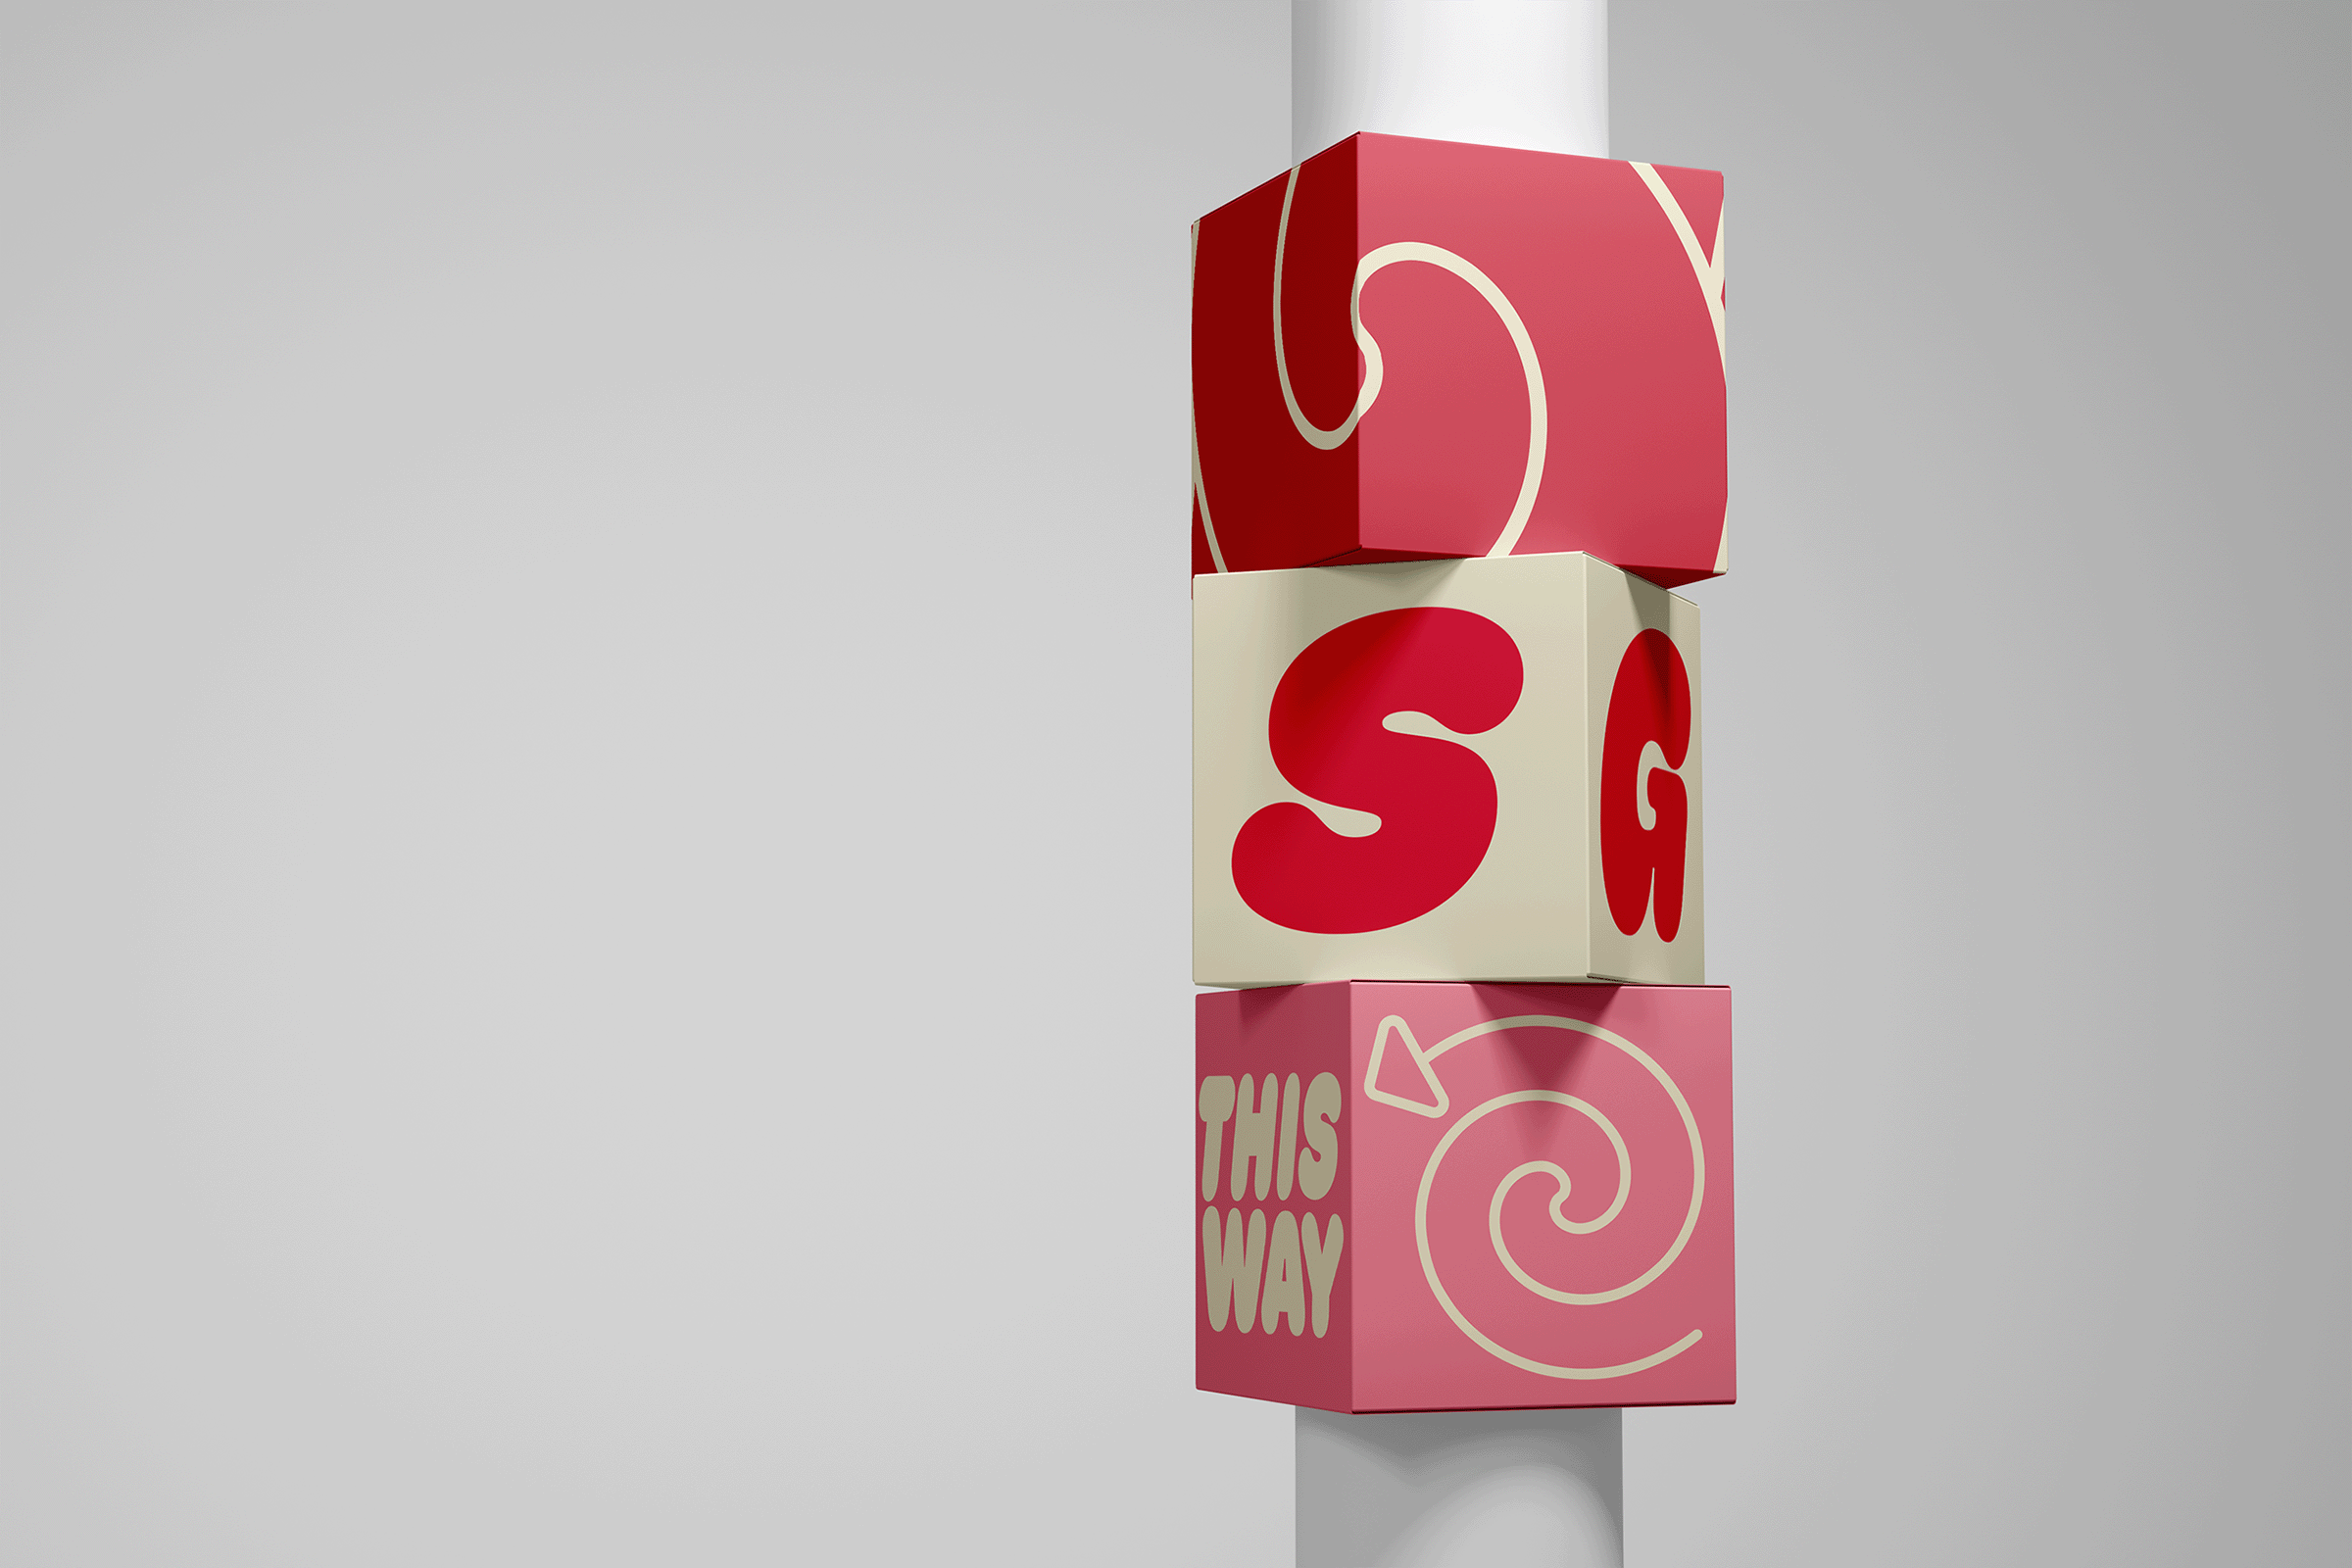 Three stacked cubes, two pink and one cream, on a pole that show the direction of an ice cream bar with a swirled arrow